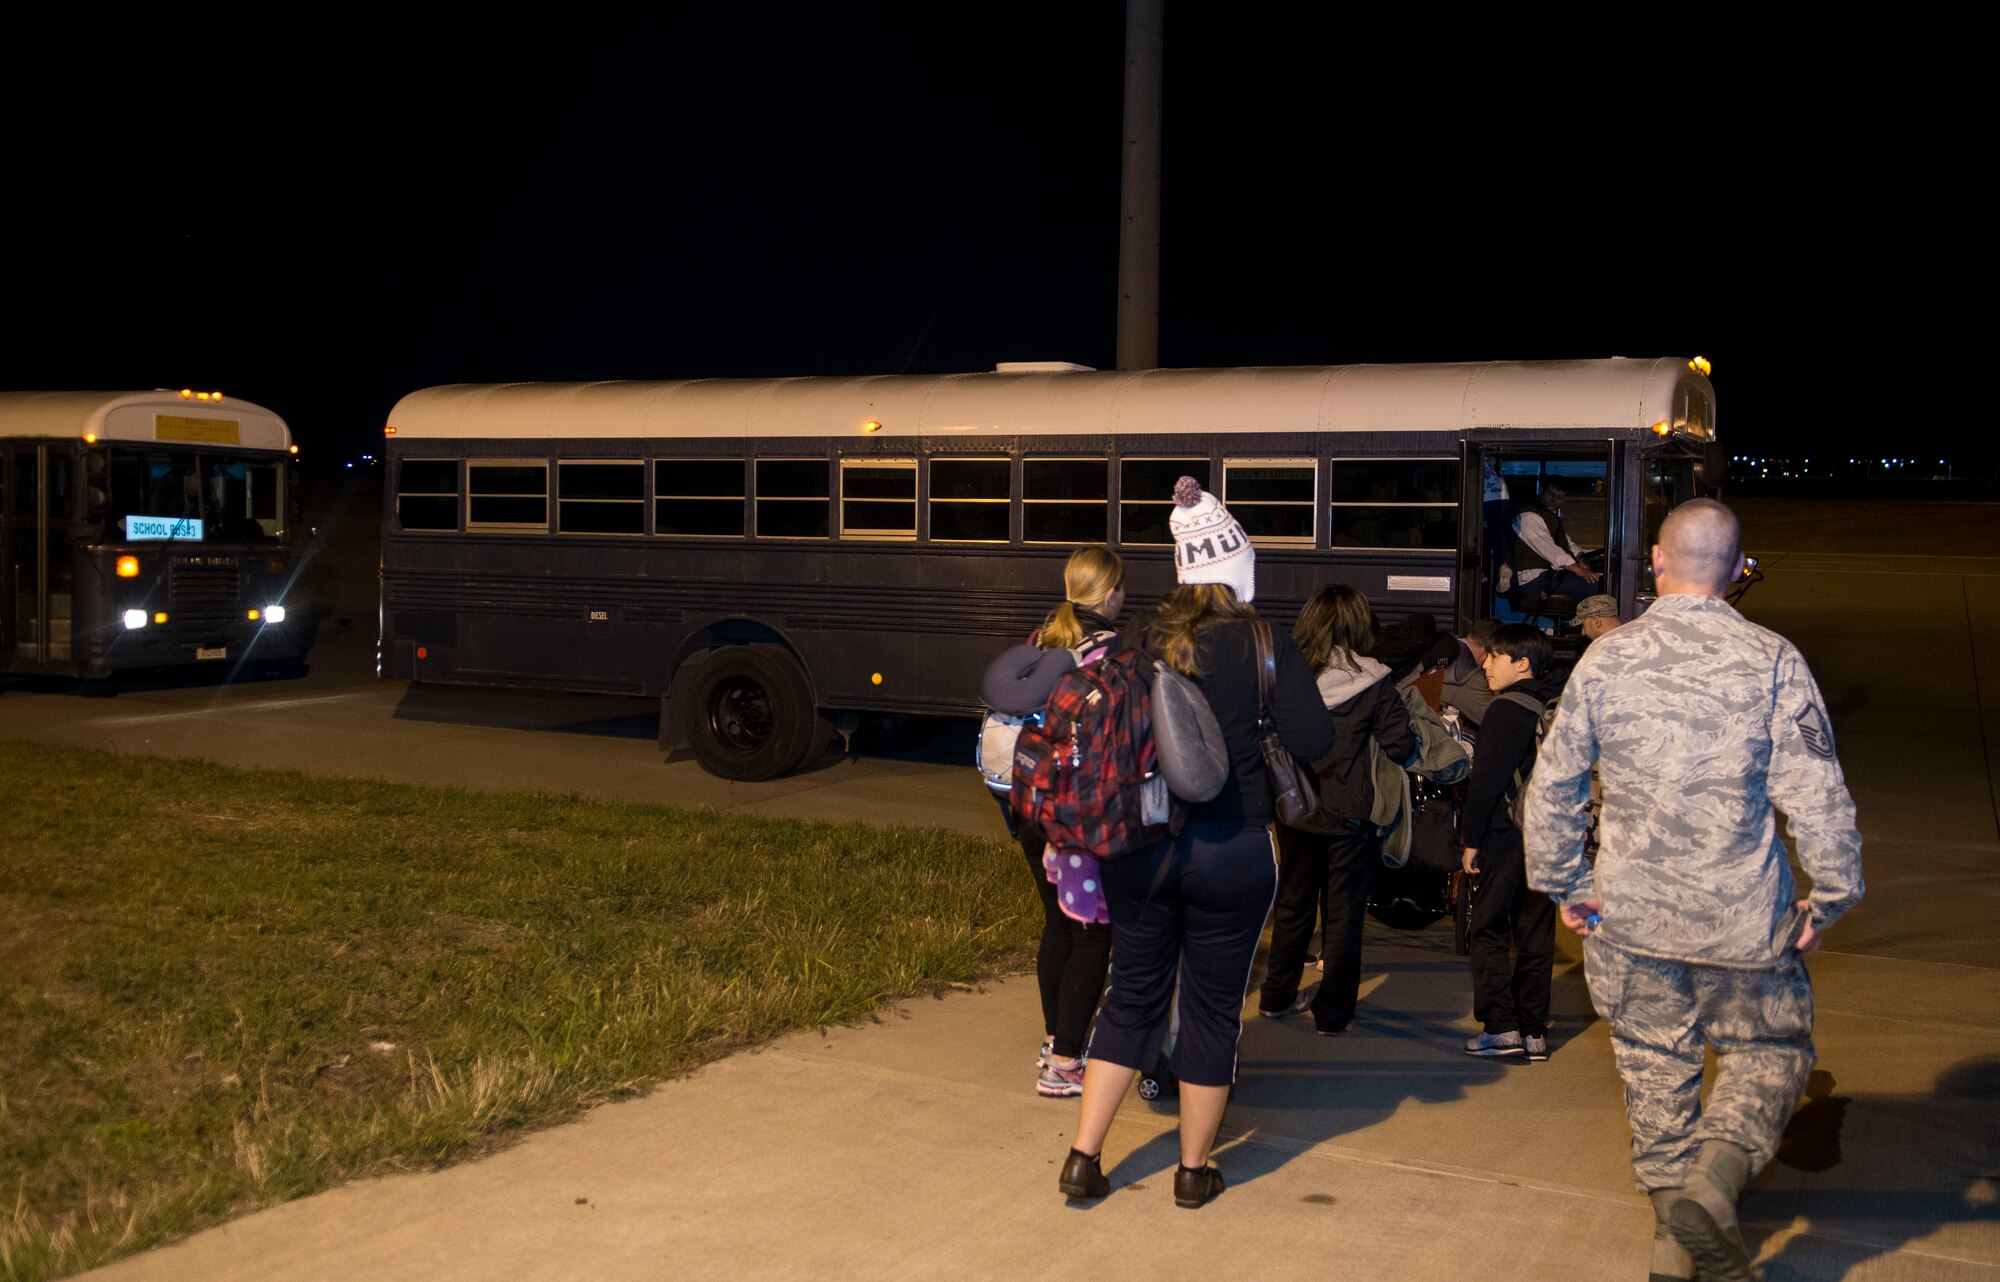 Families of U.S. Airmen and Department of Defense civilians board a bus to be taken to the passenger terminal during an ordered departure March 30, 2016 at Incirlik Air Base, Turkey. U.S. forces stationed at Incirlik Air Base aided in the transportation of citizens returning to the United States. (U.S. Air Force photo by Staff Sgt. Eboni Reams/Released)